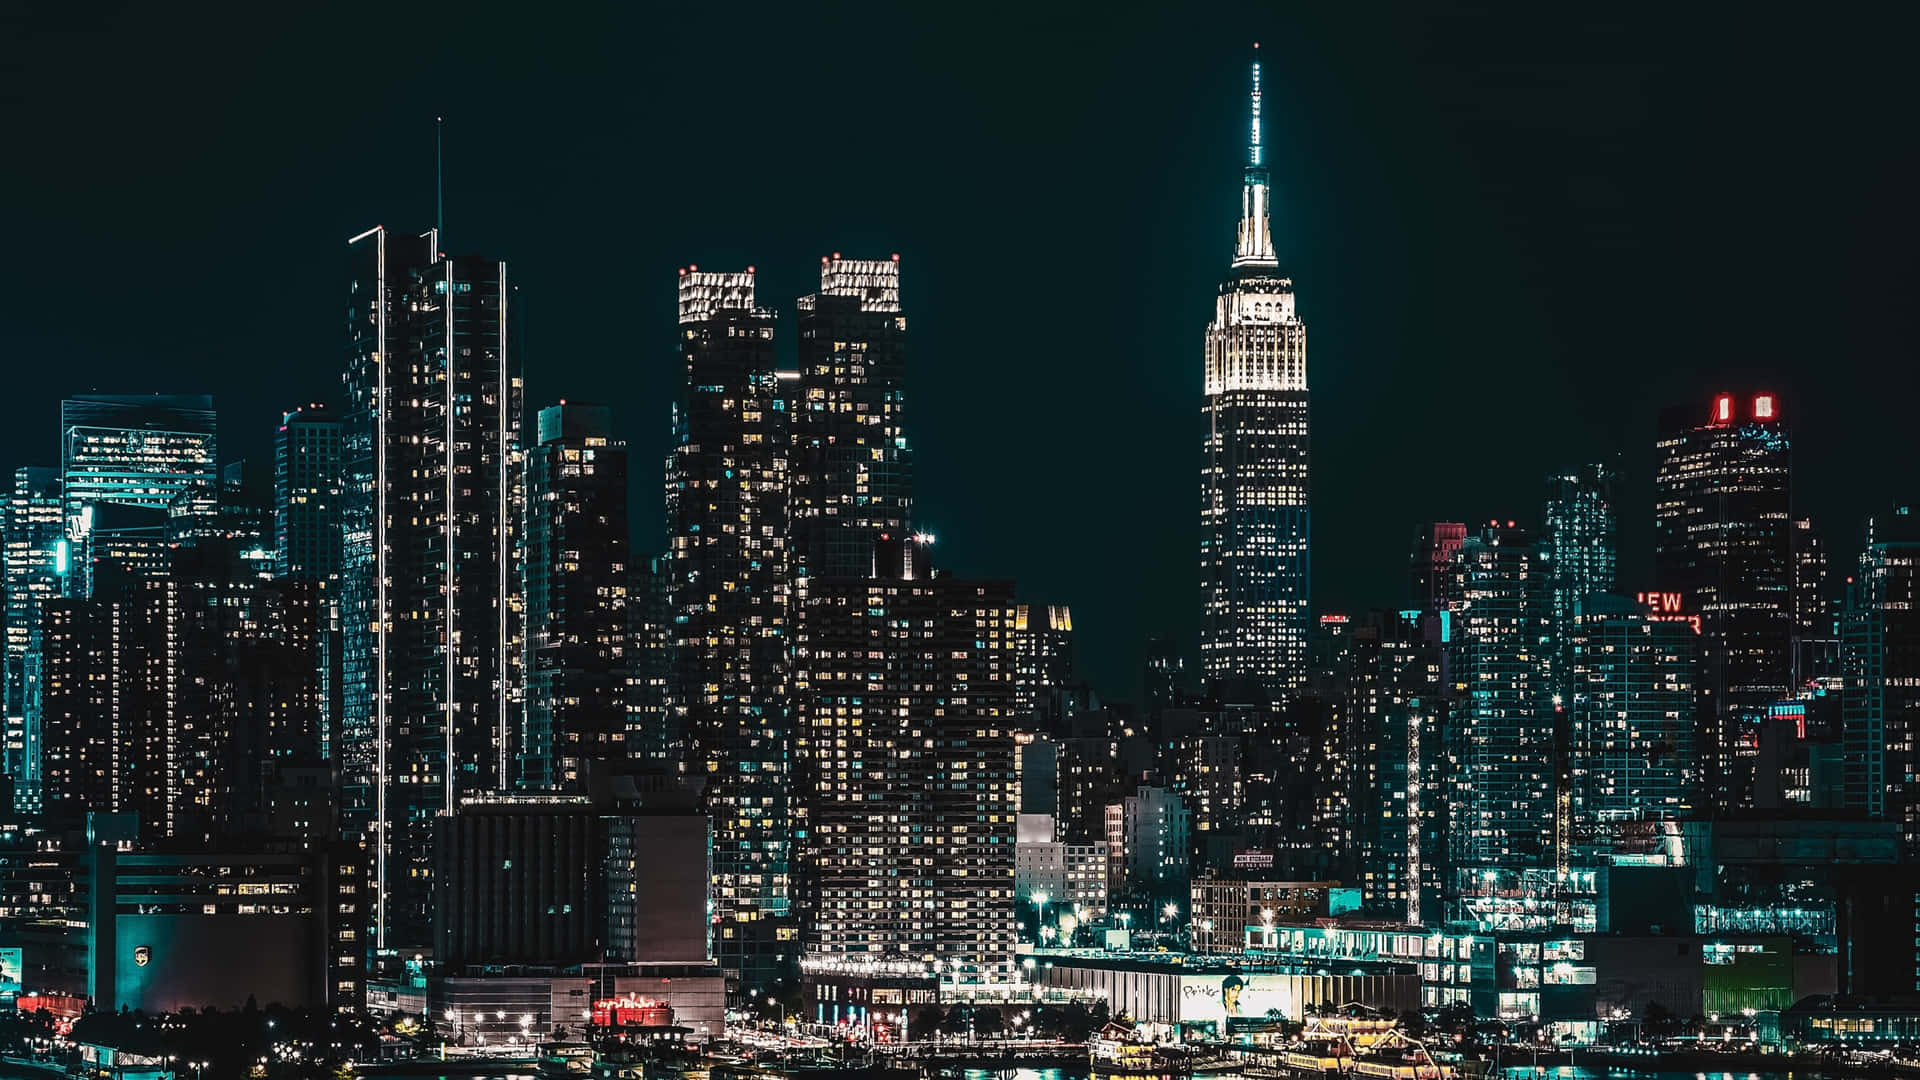 Bright lights of New York City shine against the night sky